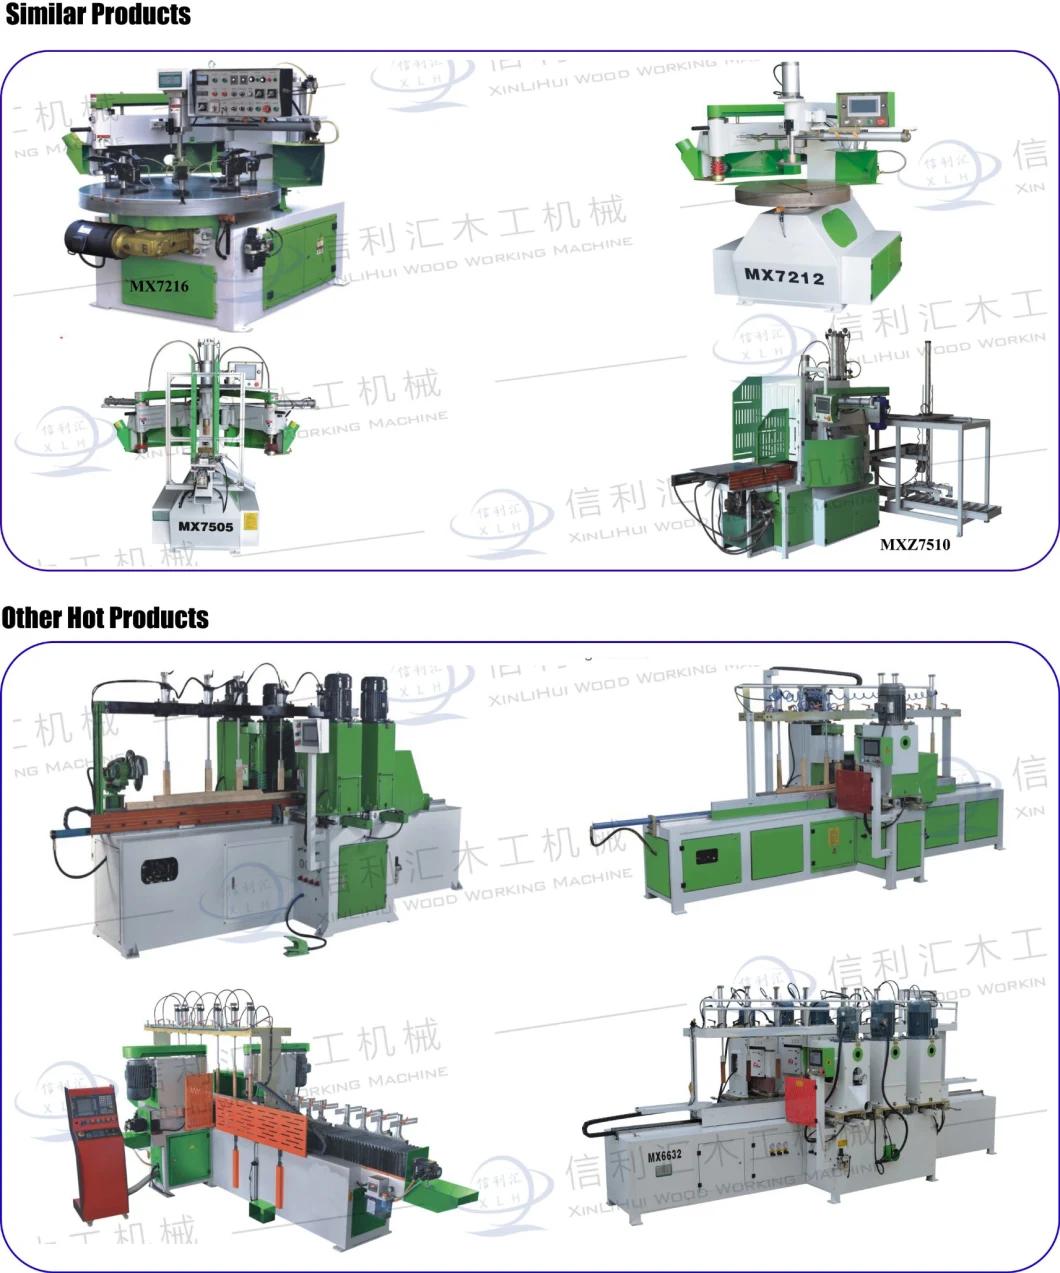 a Bamboo and Wood Processing Plant for Cups, Saucers, Spoon Fork and Decorative Items Making Machine etc., Wood Pellet Mill Bamboo Processing Machinery